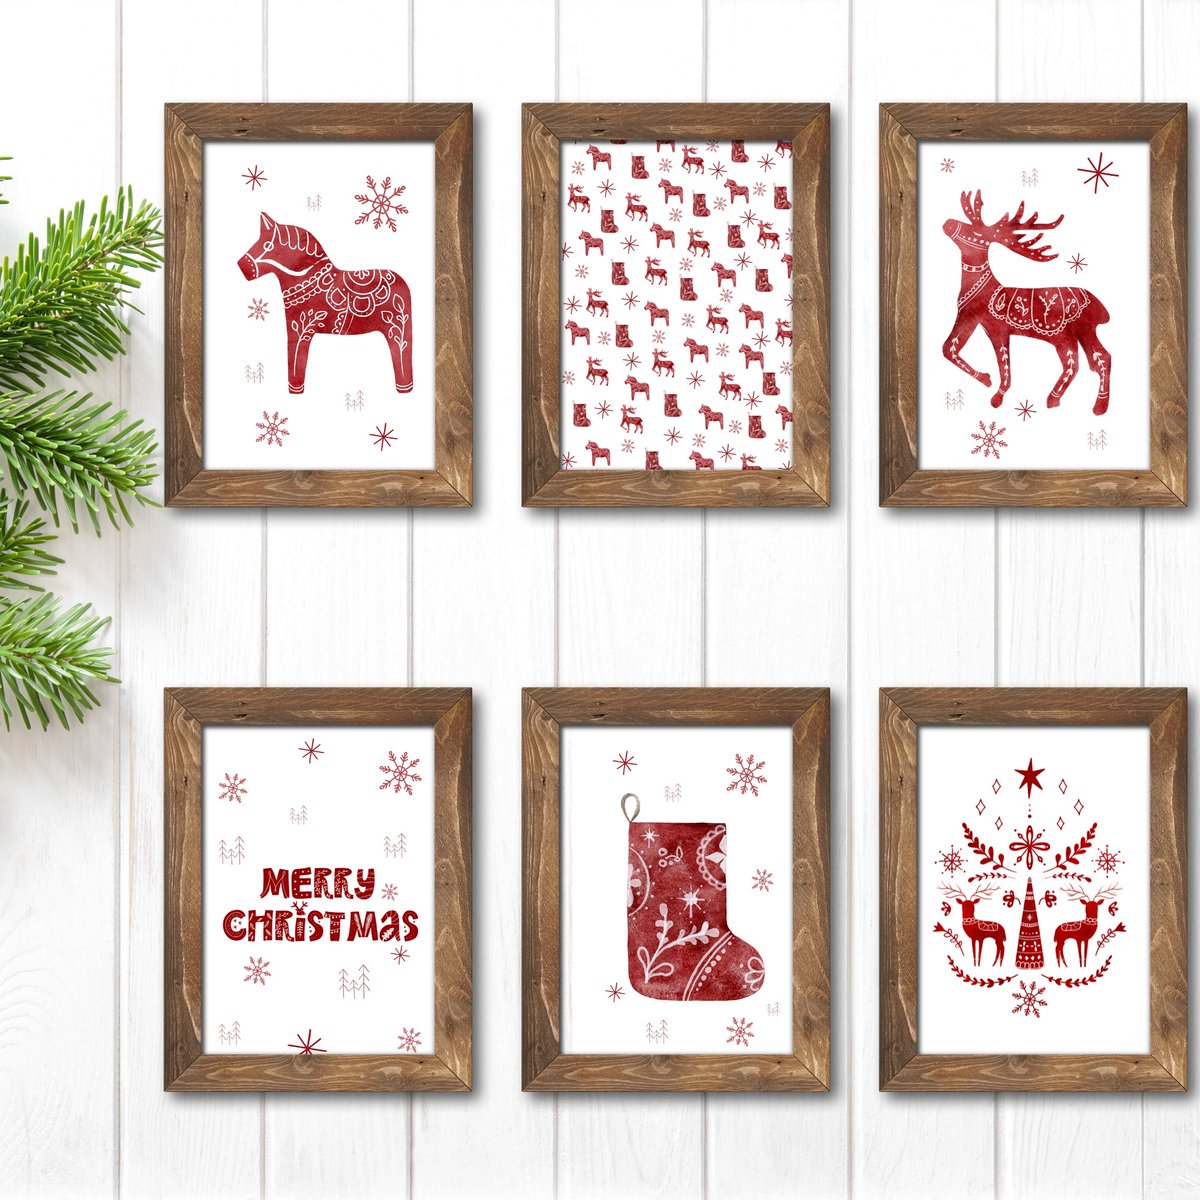 NORDIC CHRISTMAS available in my #etsygifts store follow the link etsy.com/listing/134677… #nordicchristmas #nordic #christmaswallart #christmaswallartdecor #christmasprintables #scandichristmas #christmasart #redchristmas #christmasdecorations #christmasvibes #etsychristmas